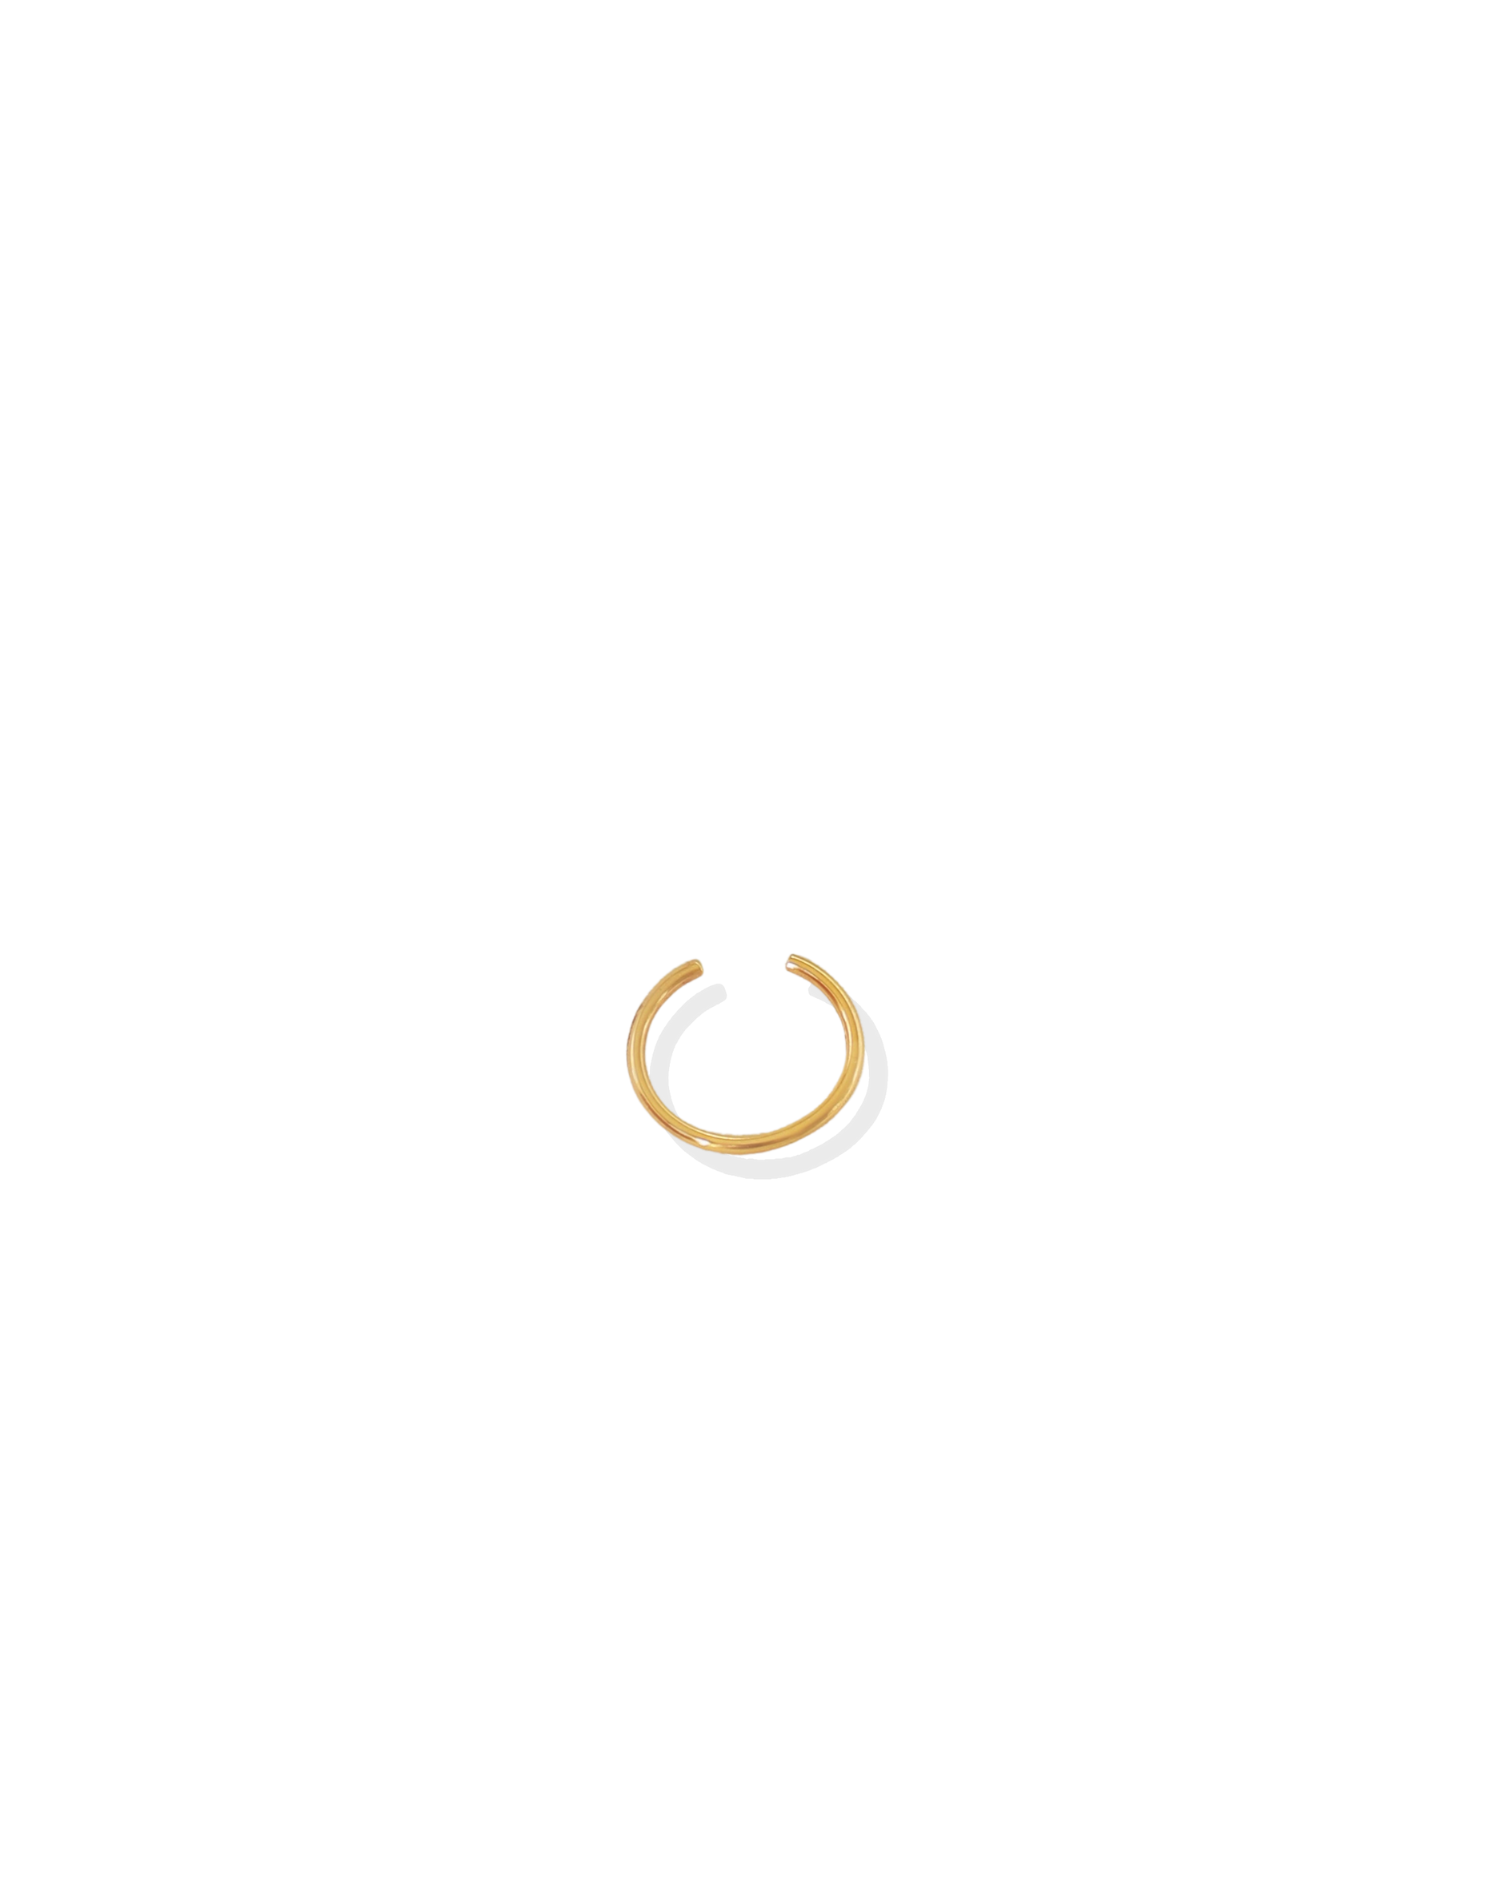 Amazon.com: Thin Gold Filled Tiny Nose Ring Hoop - 24 gauge very Thin Nose  Hoop Tiny Piercings Nose Rings hoop - nose piercing Hoop : Handmade Products